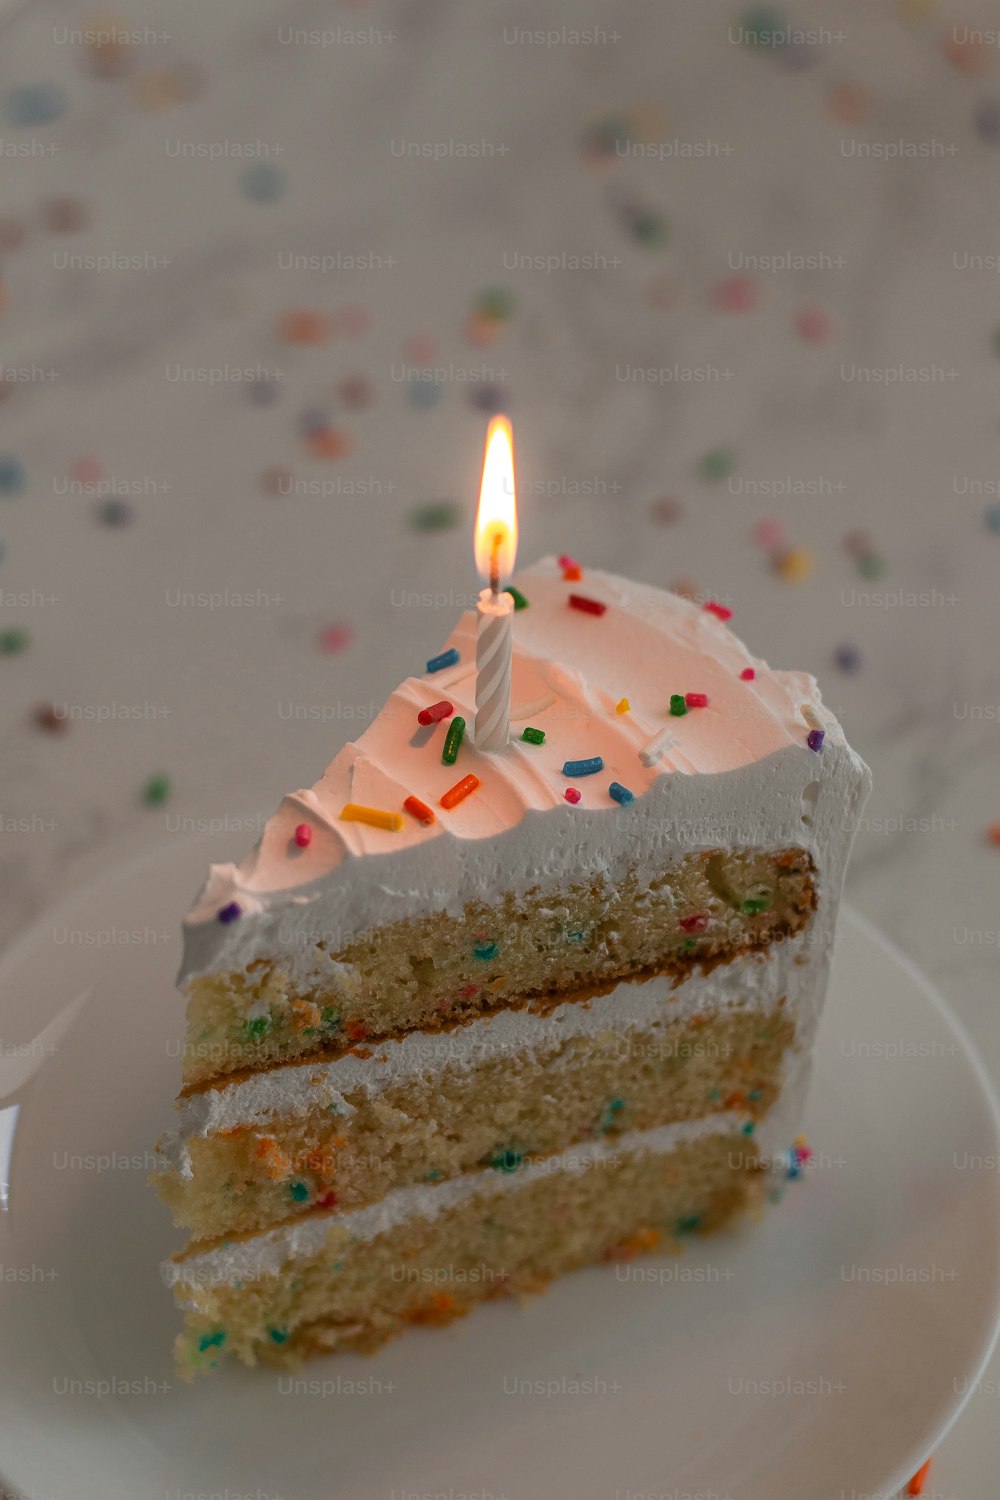 a slice of cake with a lit candle on it